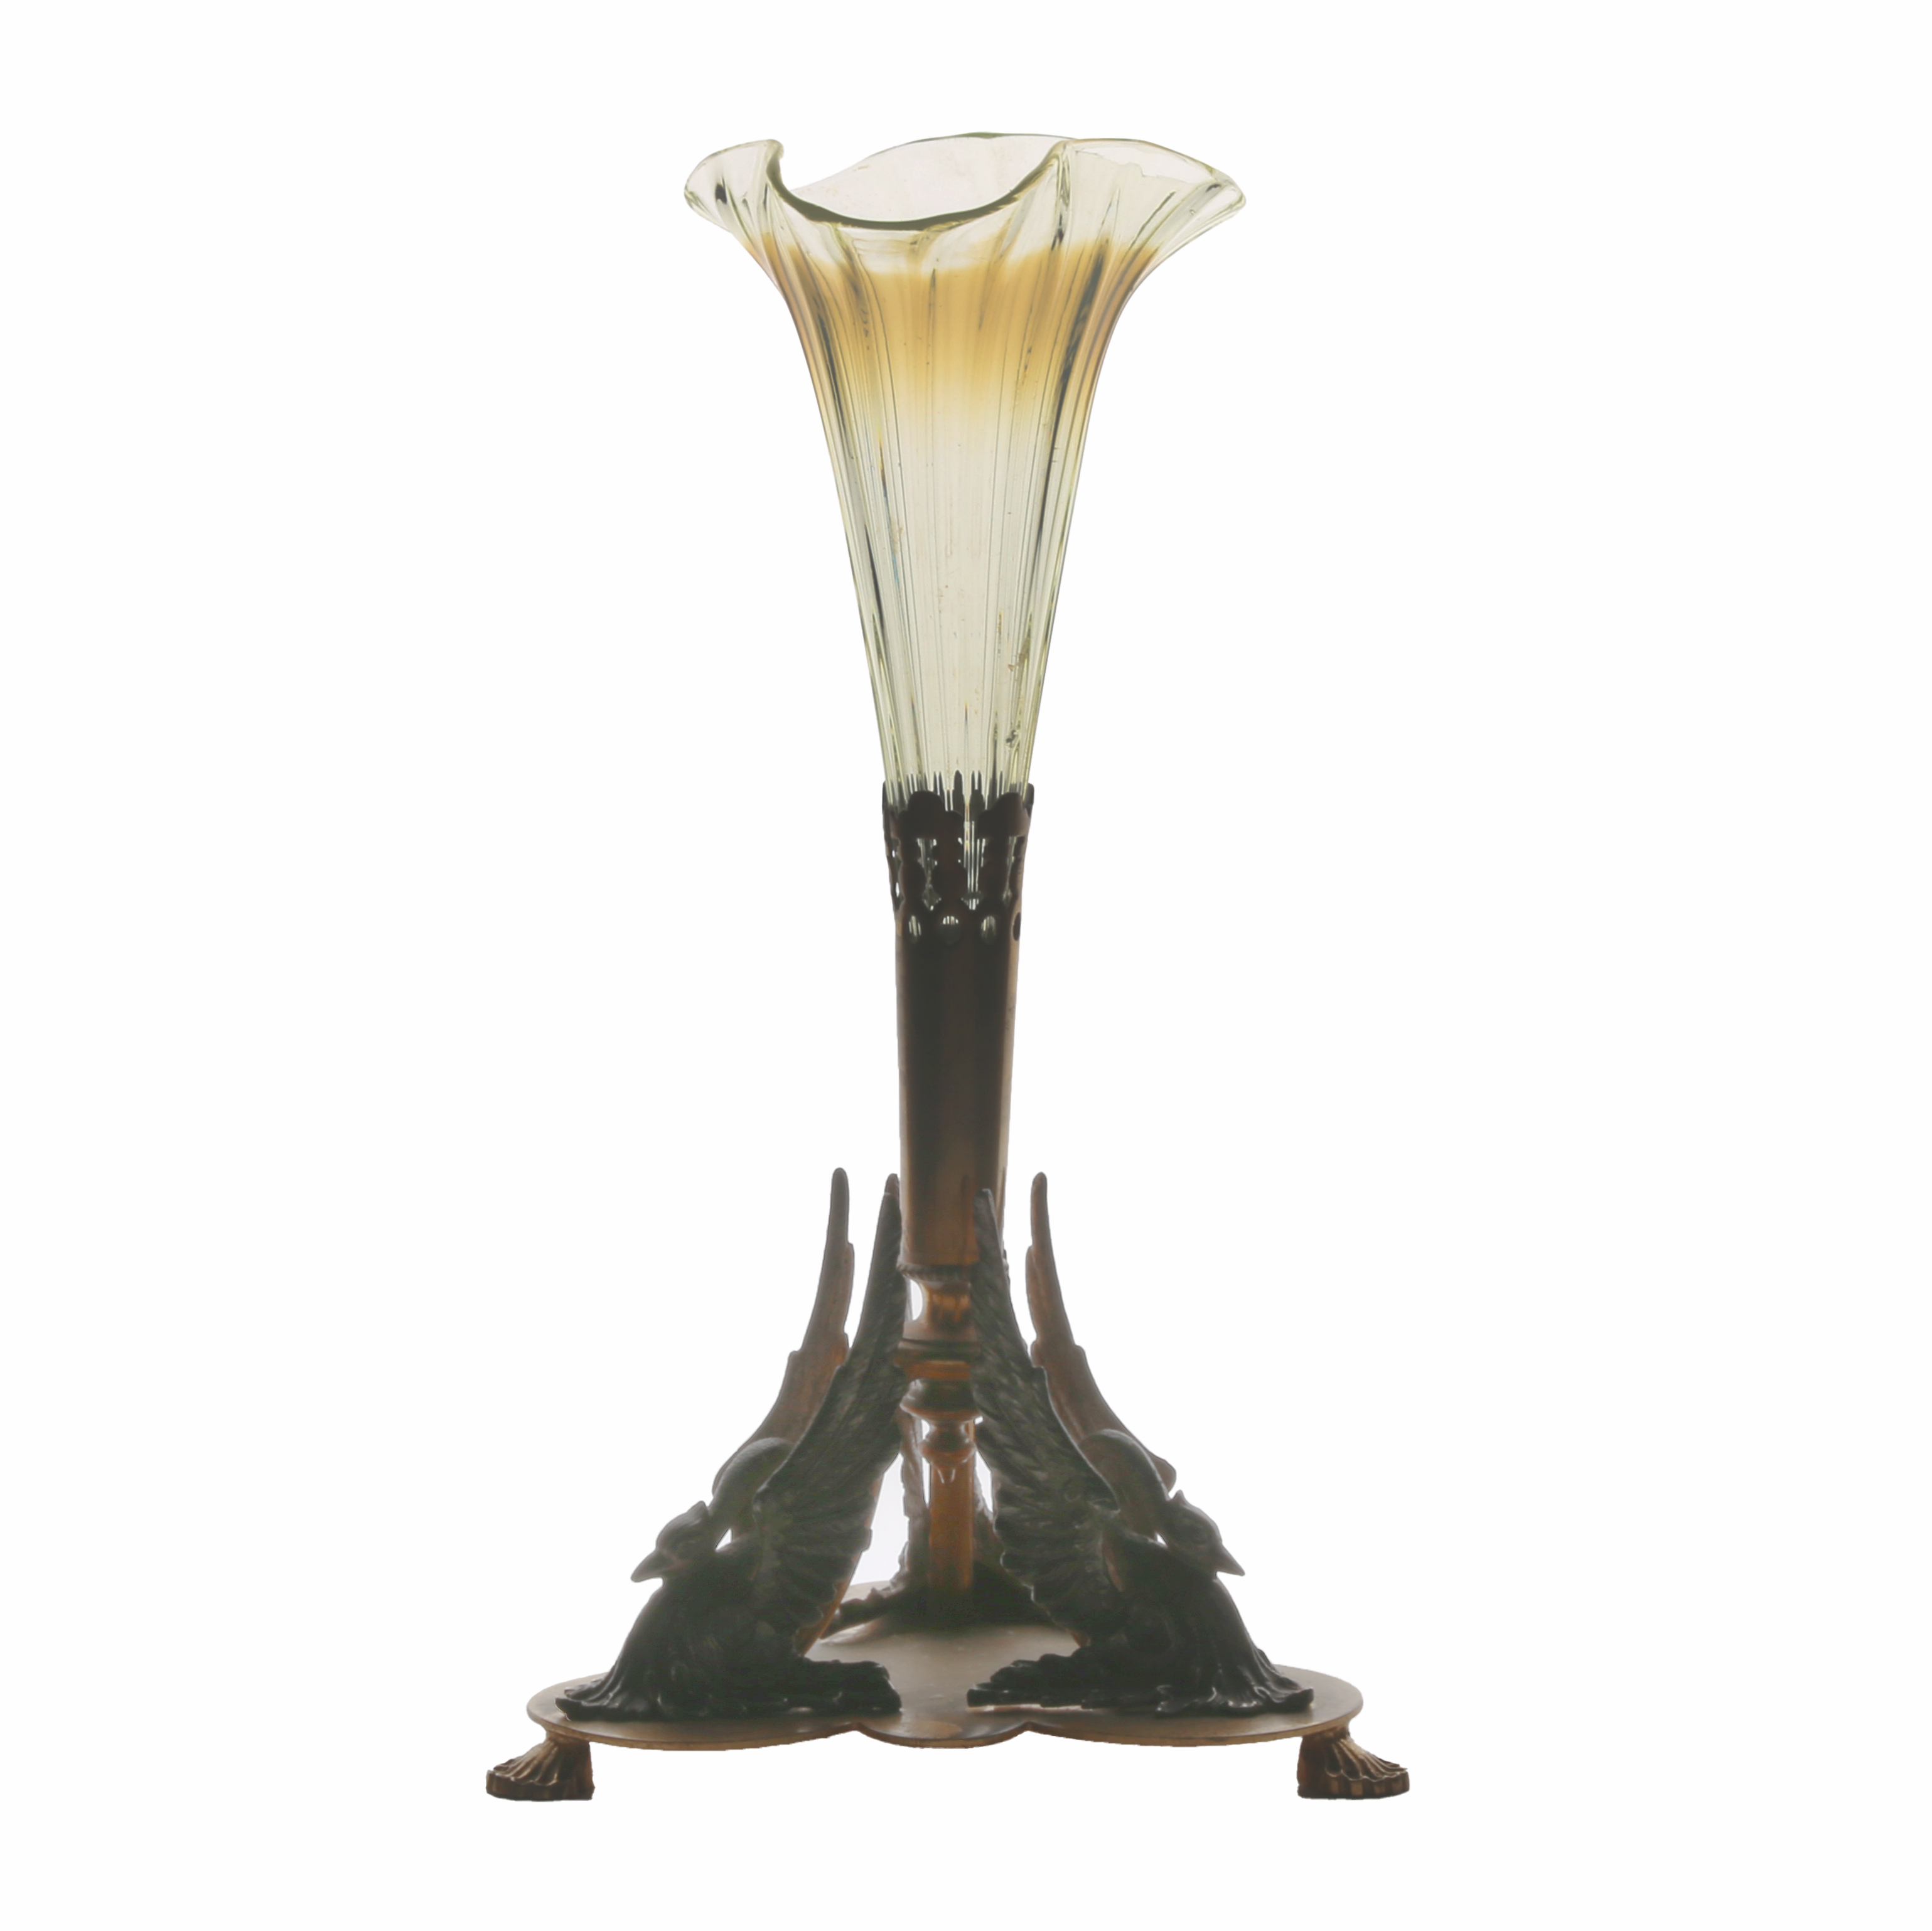 An 19th Century Solifeur vase, English circa 1870, with vaseline glass flute mounted in a brass